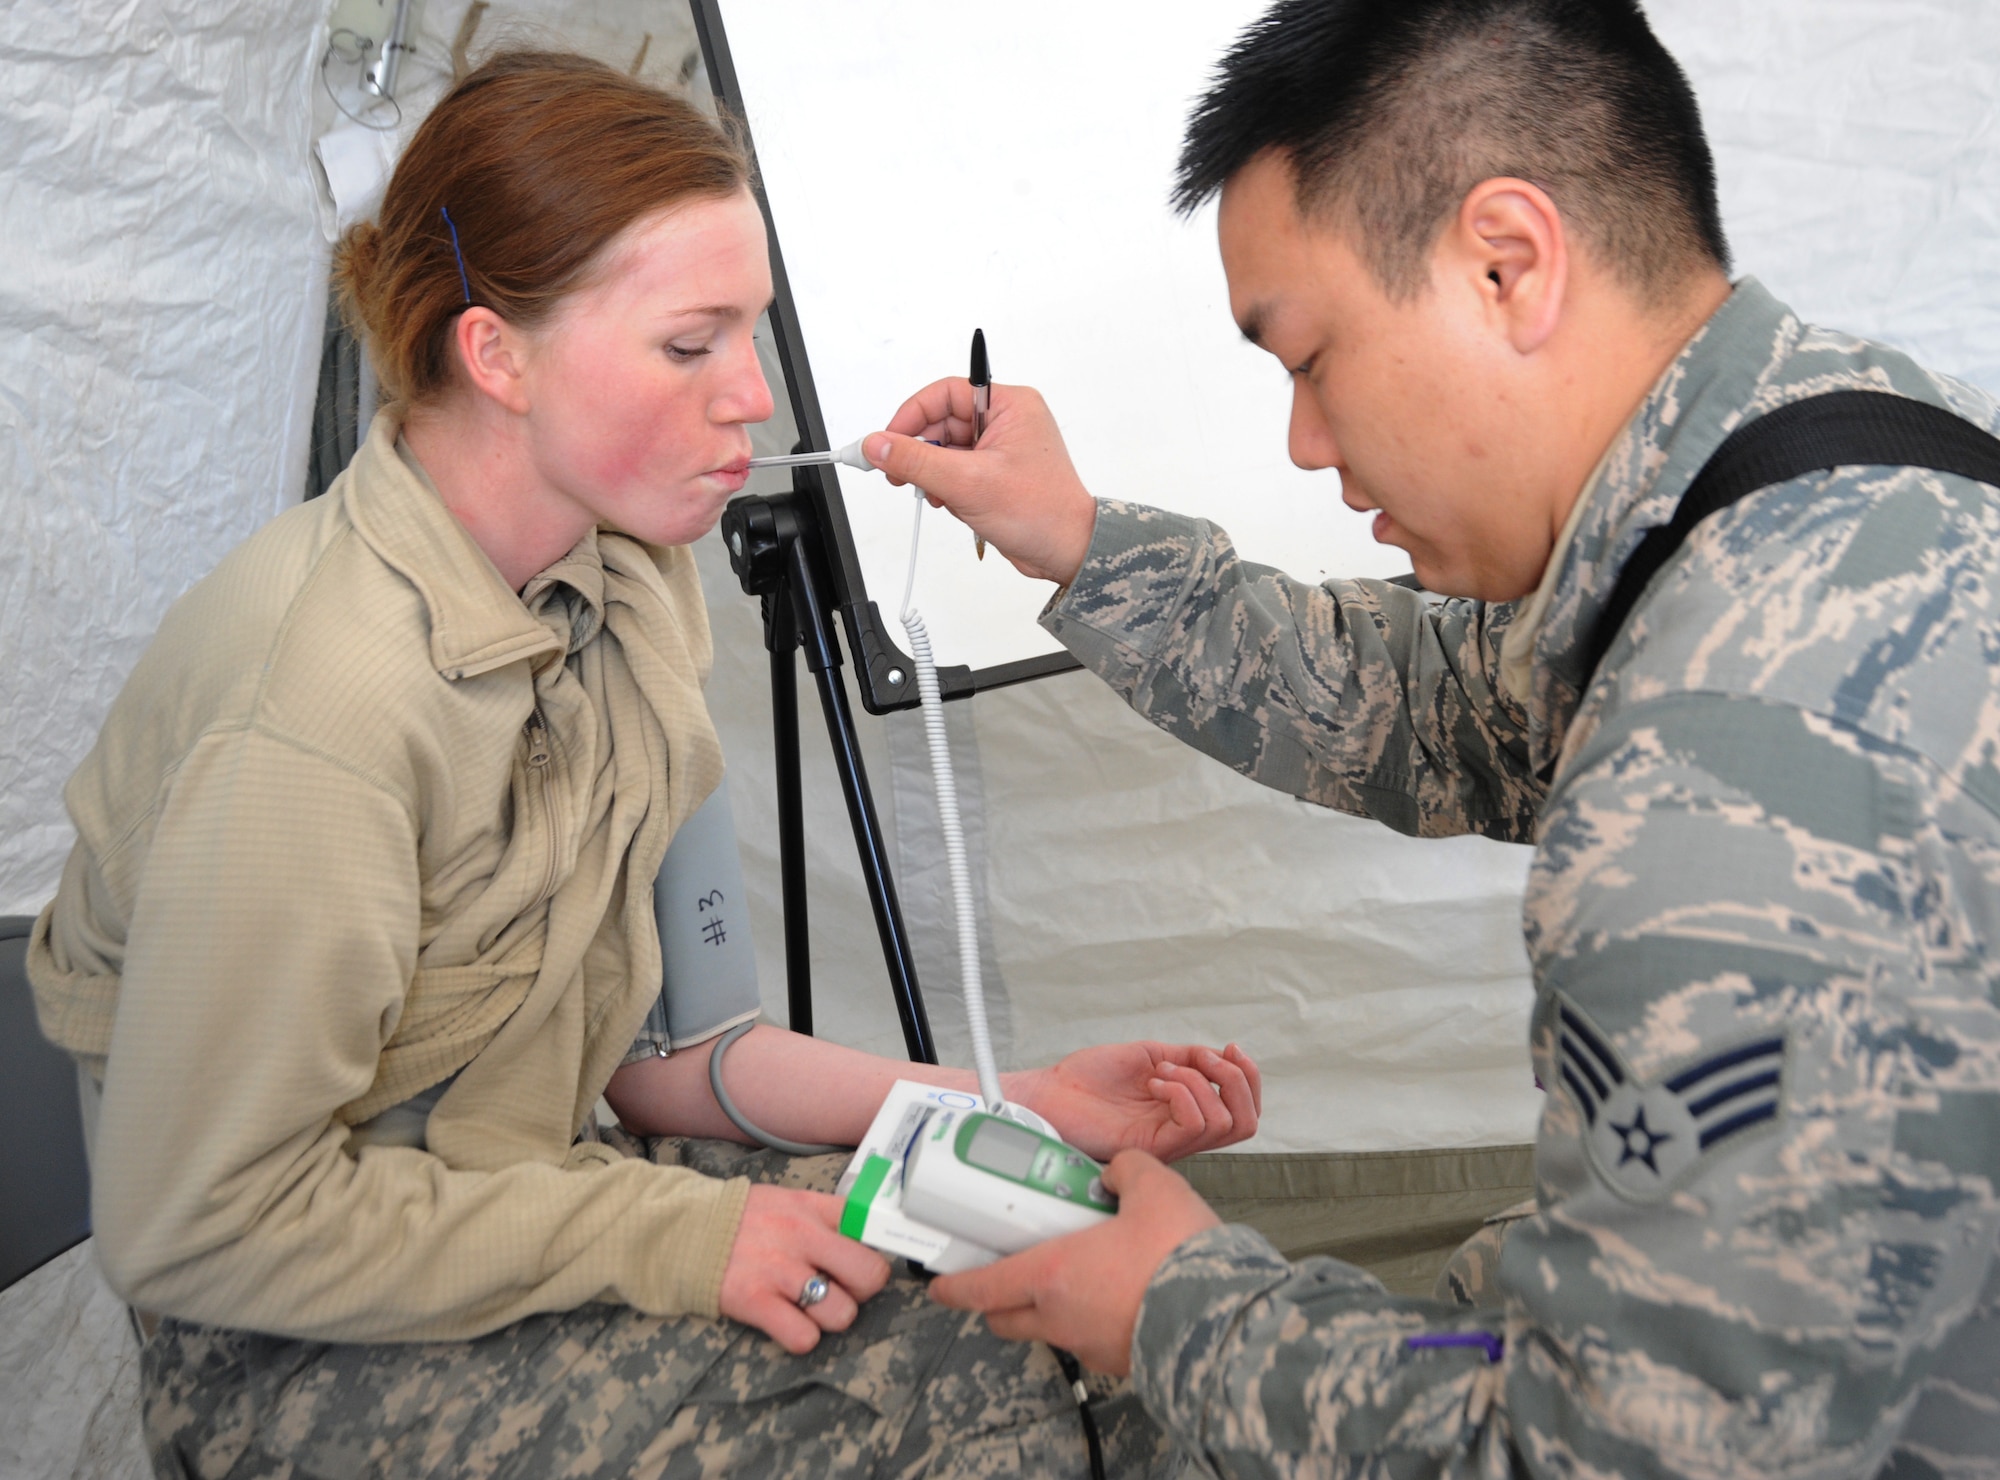 Air National Guard Senior Airman Charlie Phu takes vital readings from Army National Guard Pfc. Jessica Lammert after she has finished her shift in the decontamination process of victims in the Vigilant Guard-Alaska 2014 exercise, near Joint Base Elmendorf-Richardson, Anchorage, Alaska, March 28, 2014. Both are members of the Oregon National Guard’s CBRNE Enhanced Response Force Package (CERFP). (U.S. Air National Guard photo by Tech. Sgt. John Hughel, 142nd Fighter Wing Public Affairs/Released)